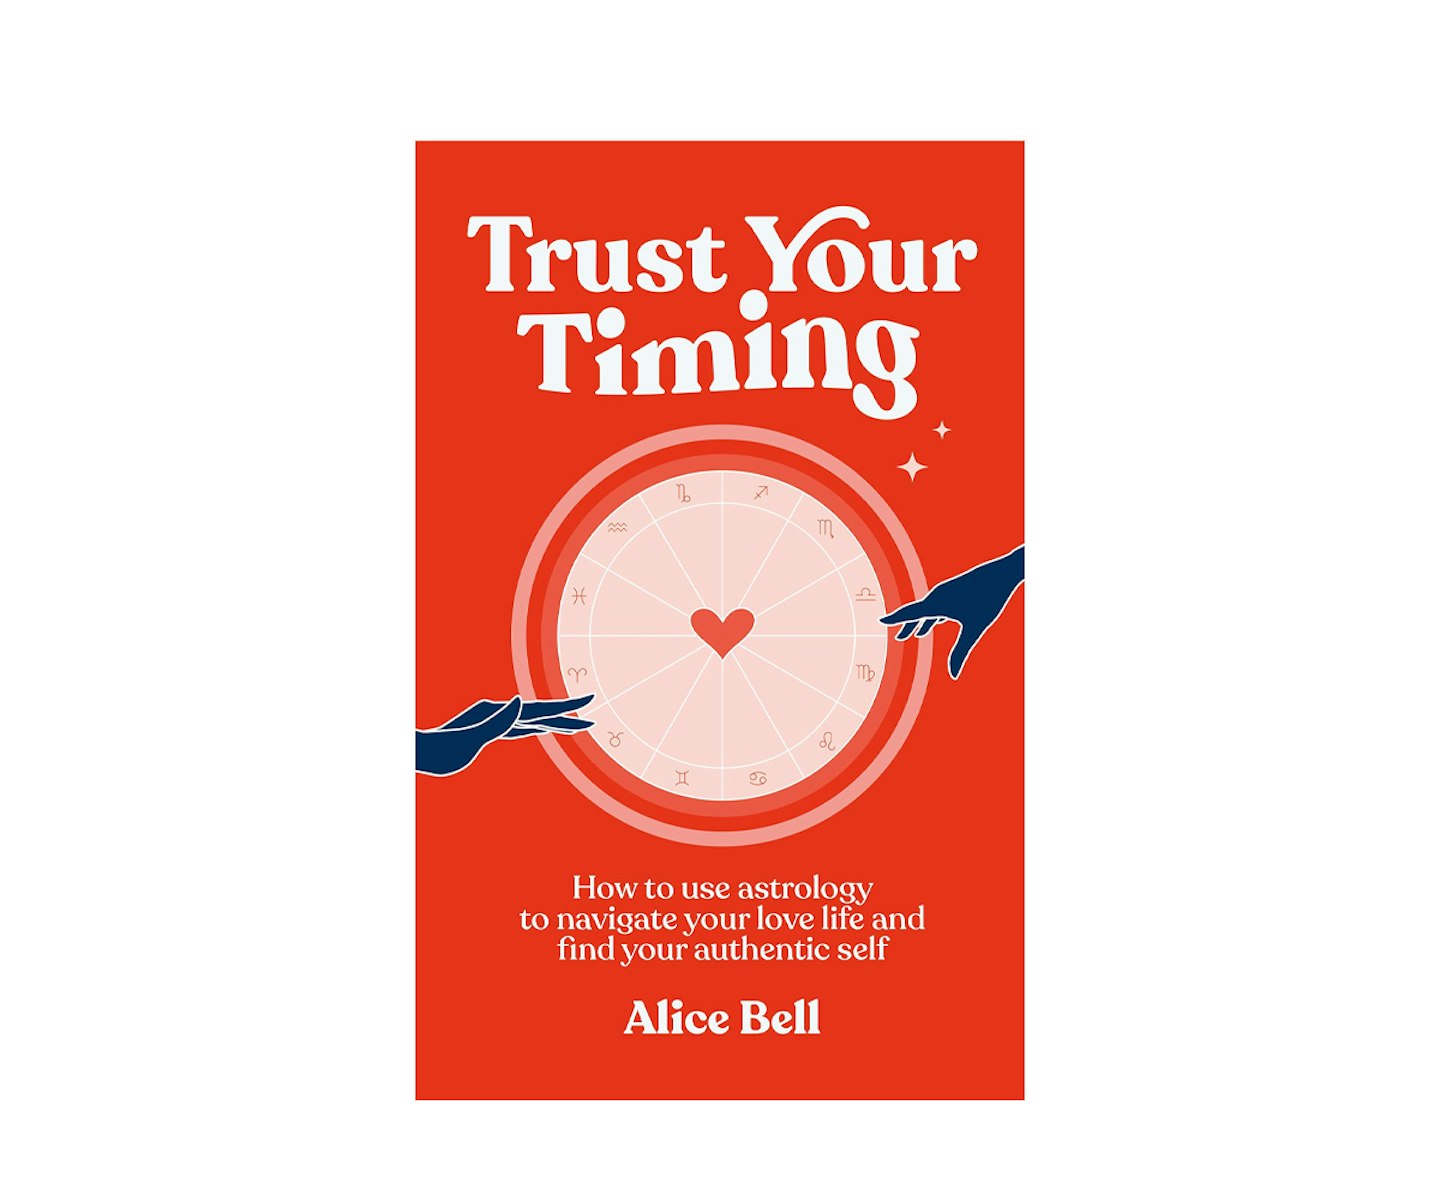 Ttust your timing Alice Bell